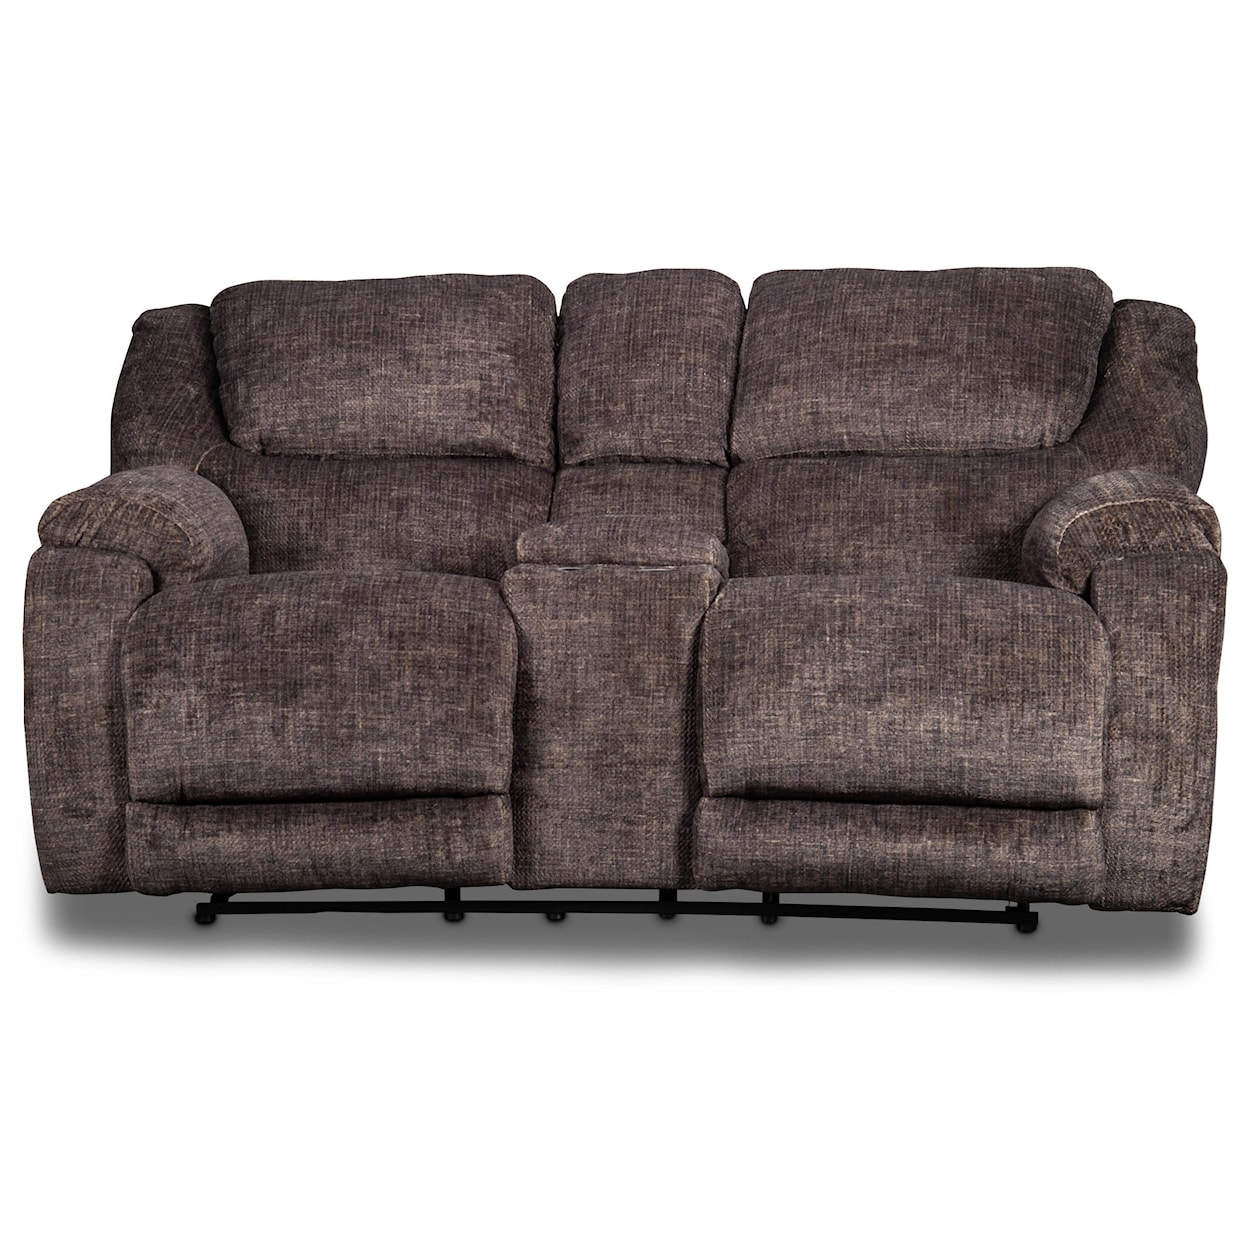 HomeStretch Aramis Aramis Reclining Loveseat with Console